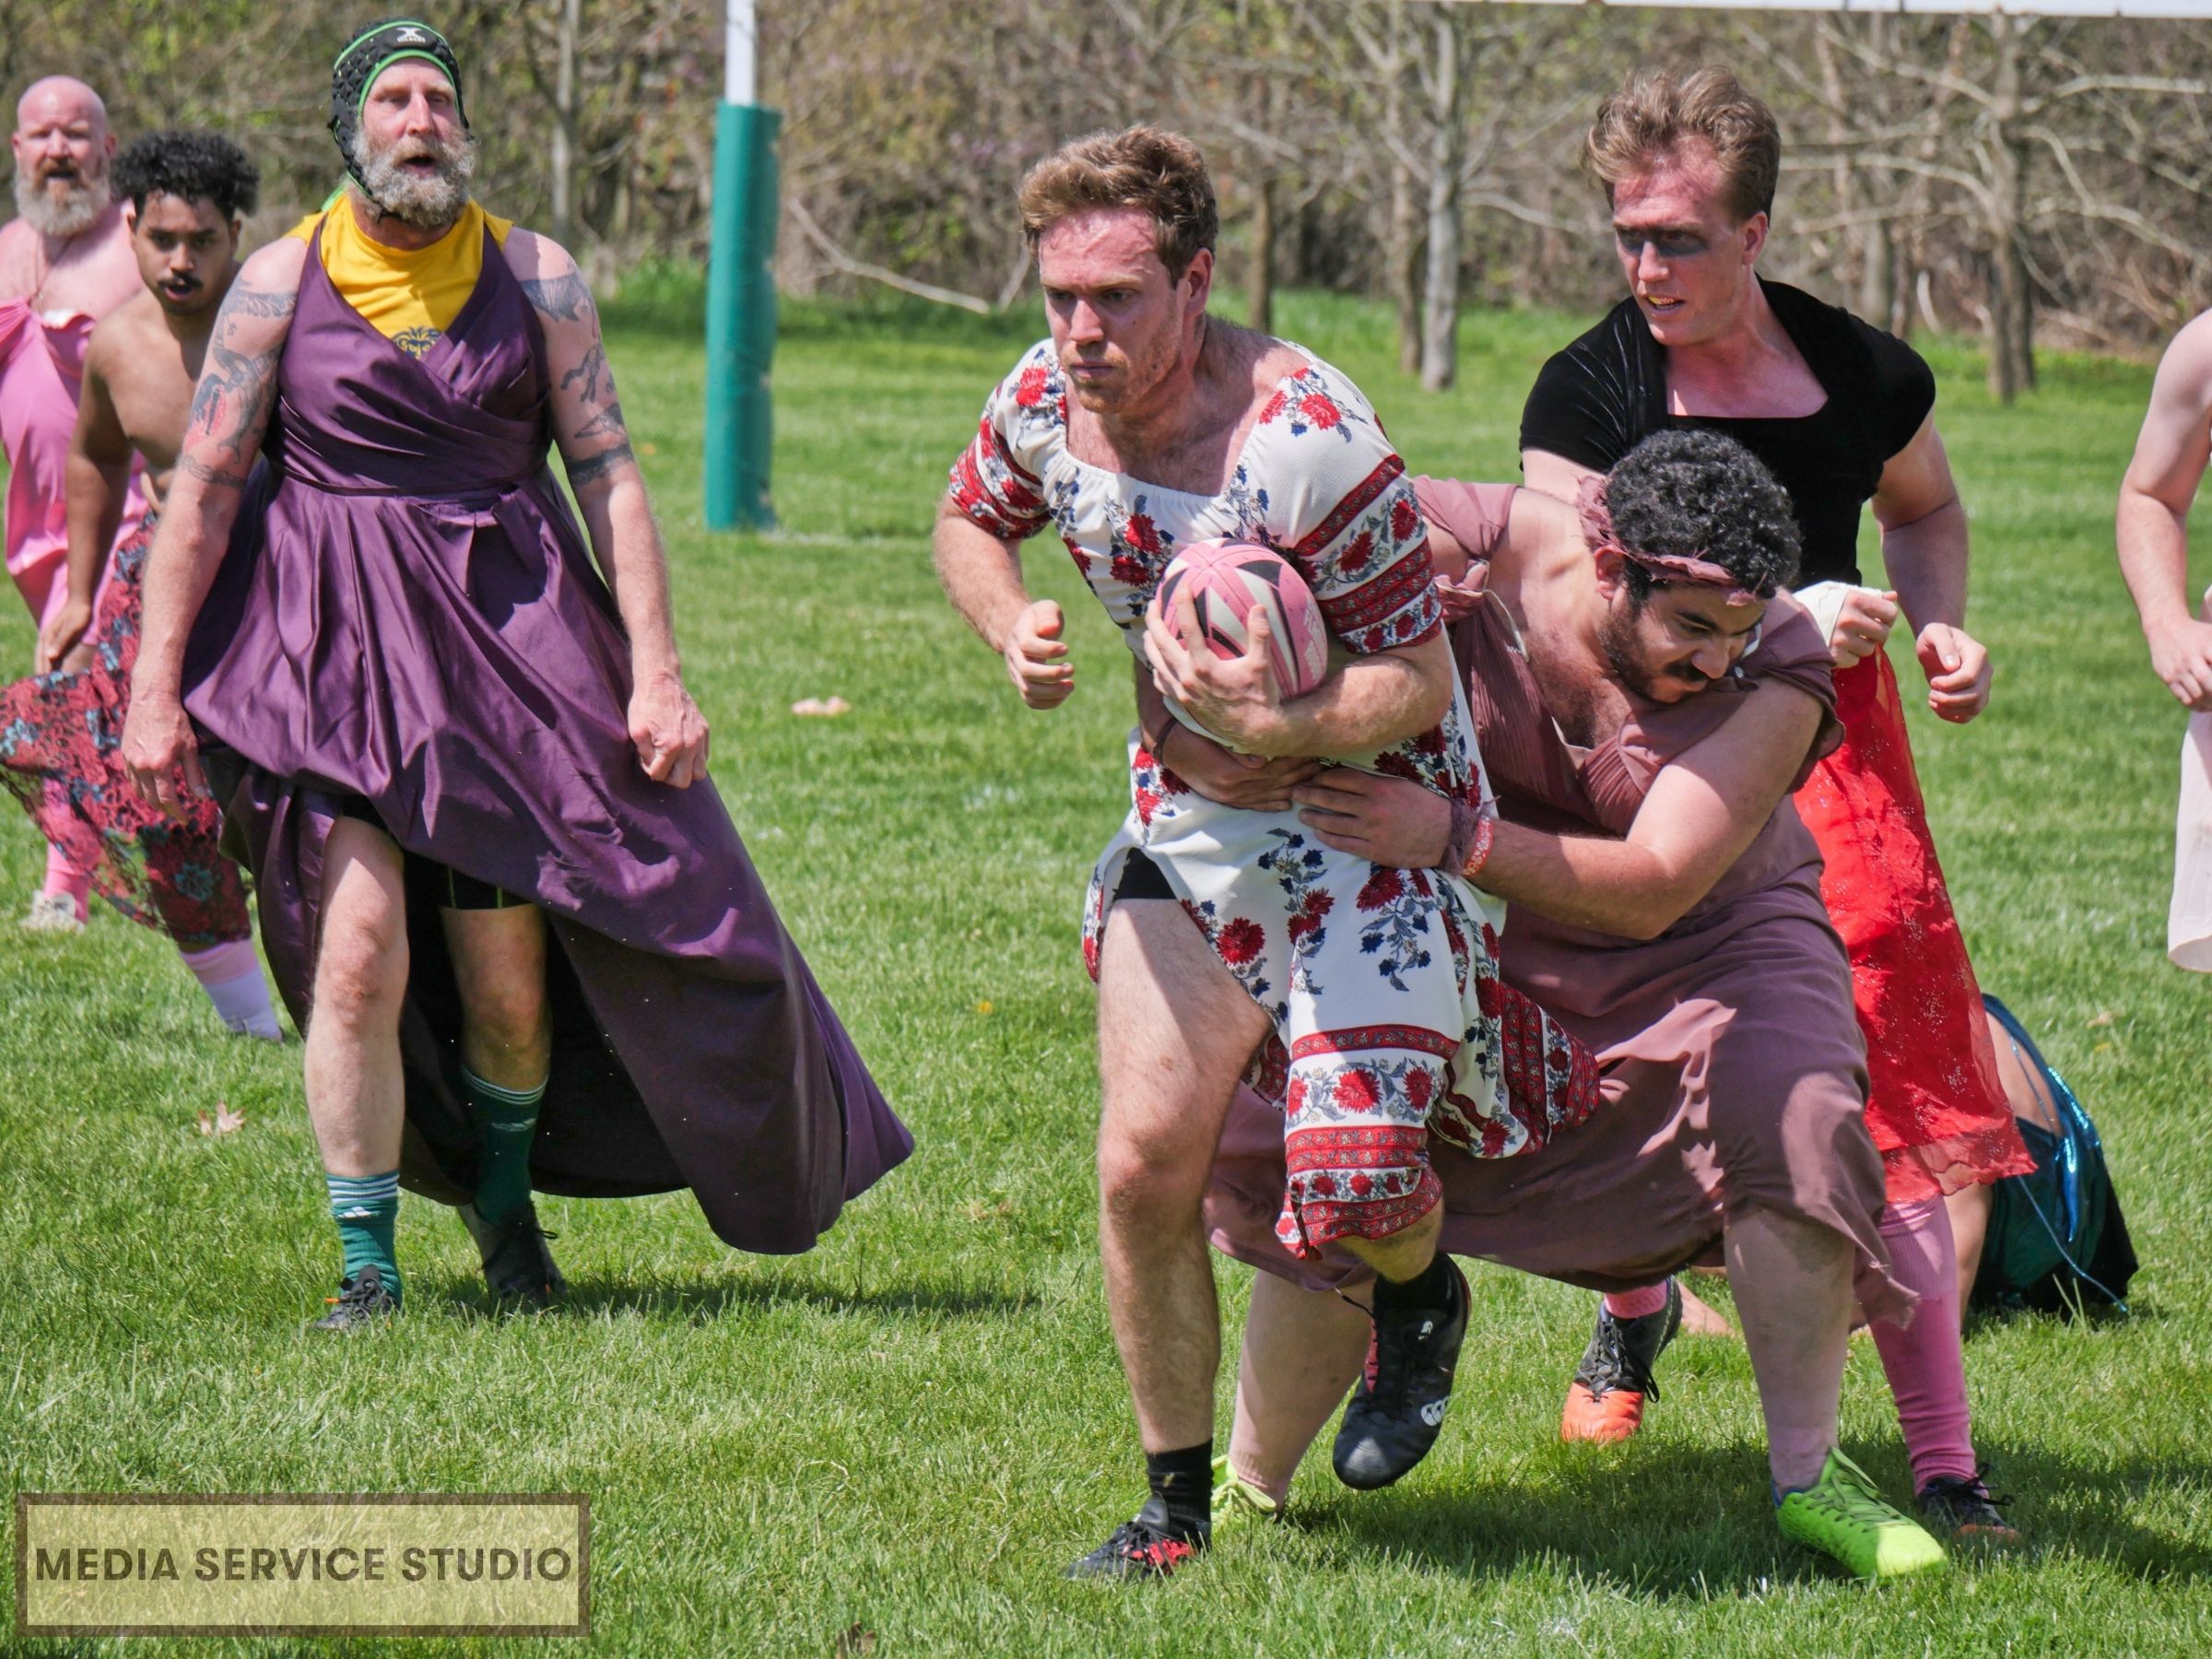 Baltimore Flamingos Rugby Team. Prom Dress Rugby Event. LGBTQ